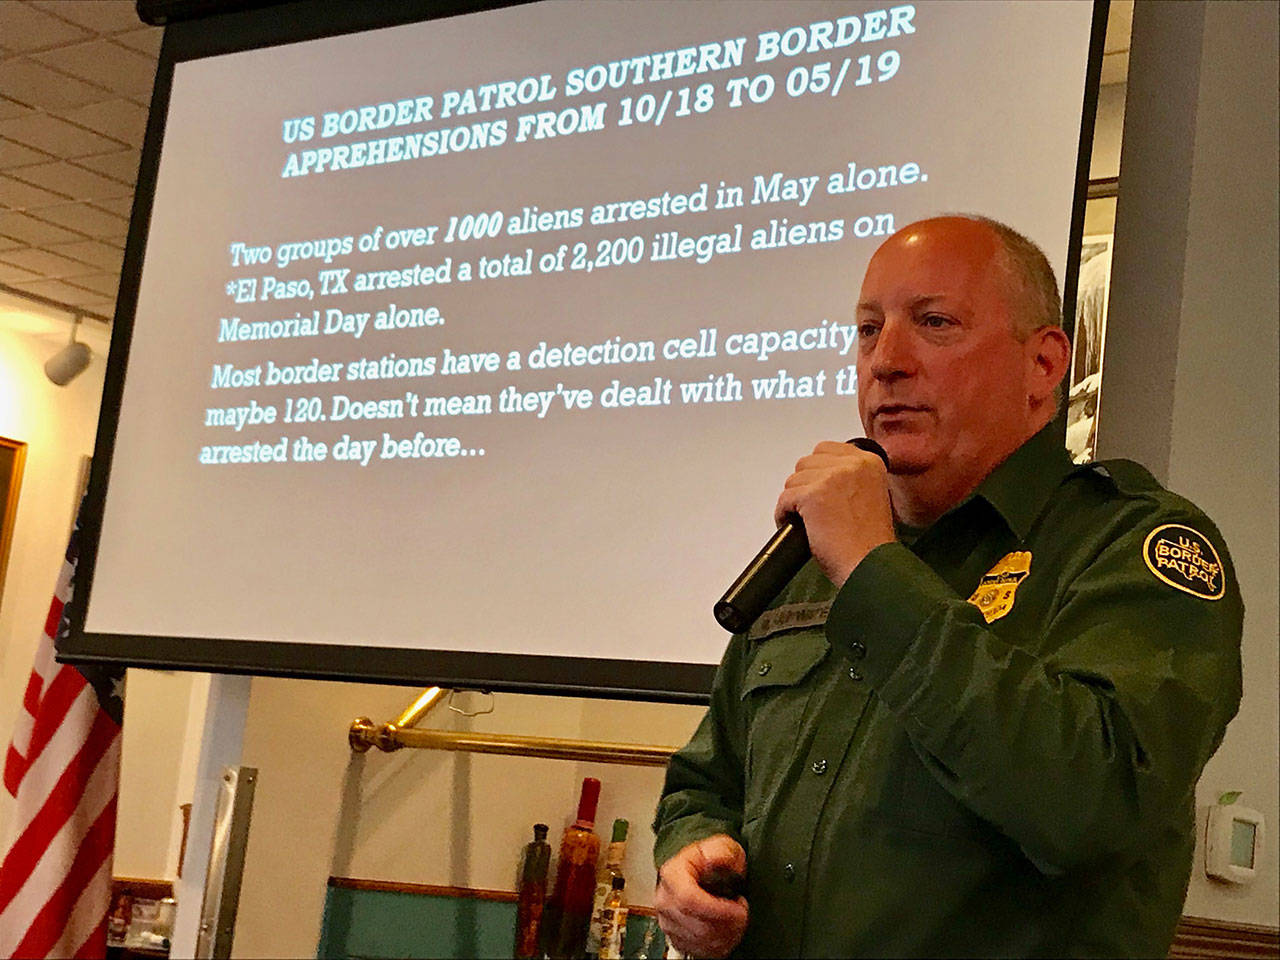 Border Patrol Agent Matthew Rainwater, who recently returned from 30 days of duty on the southern border, reviewed the agency’s challenges during a presentation Tuesday. (Paul Gottlieb/Peninsula Daily News)